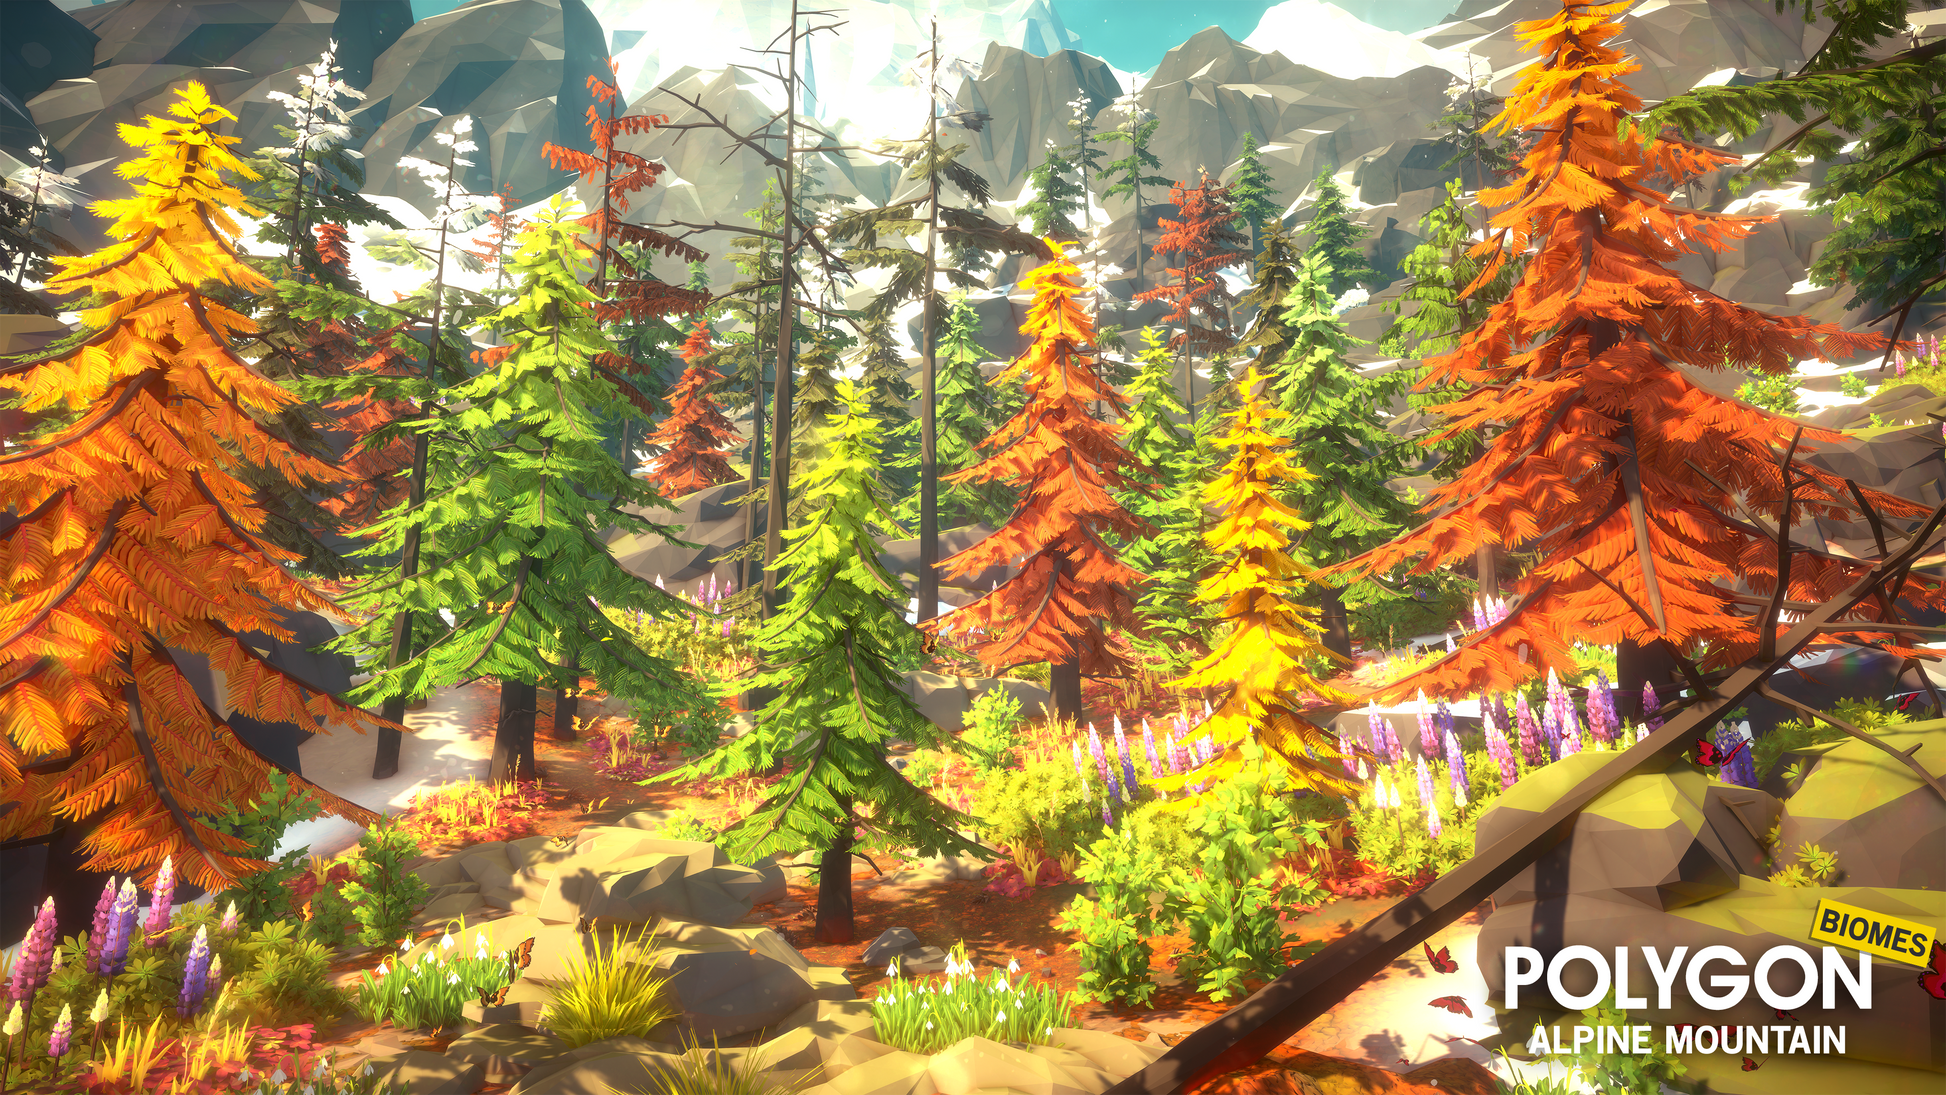 Trees on a slope below snowy mountains designed with the POLYGON Alpine Mountain game asset pack